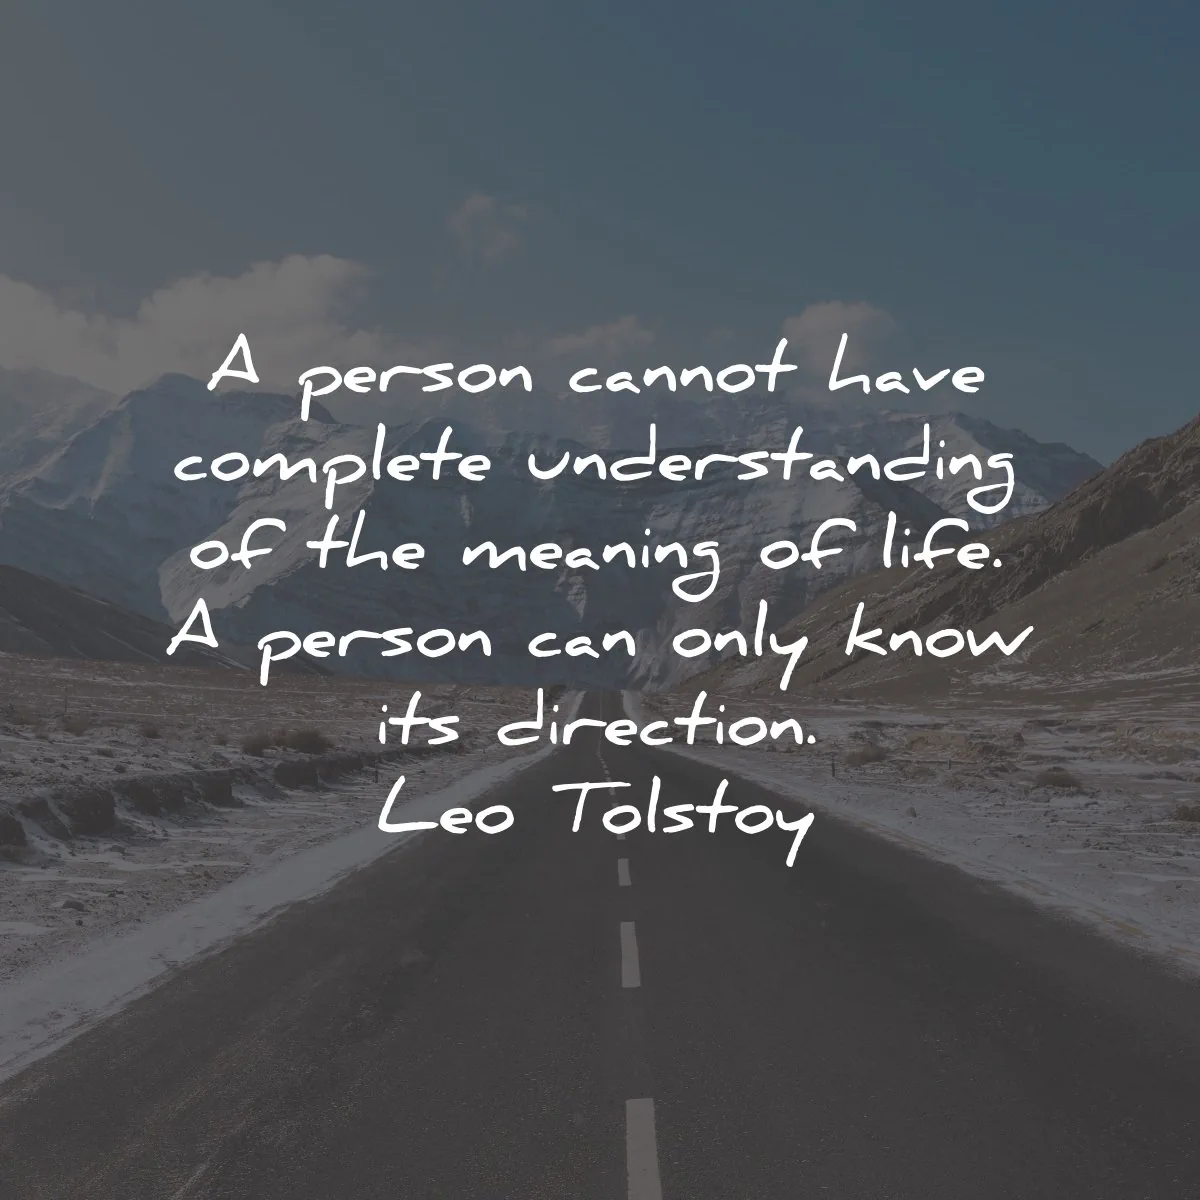 leo tolstoy quotes person cannot have understanding wisdom